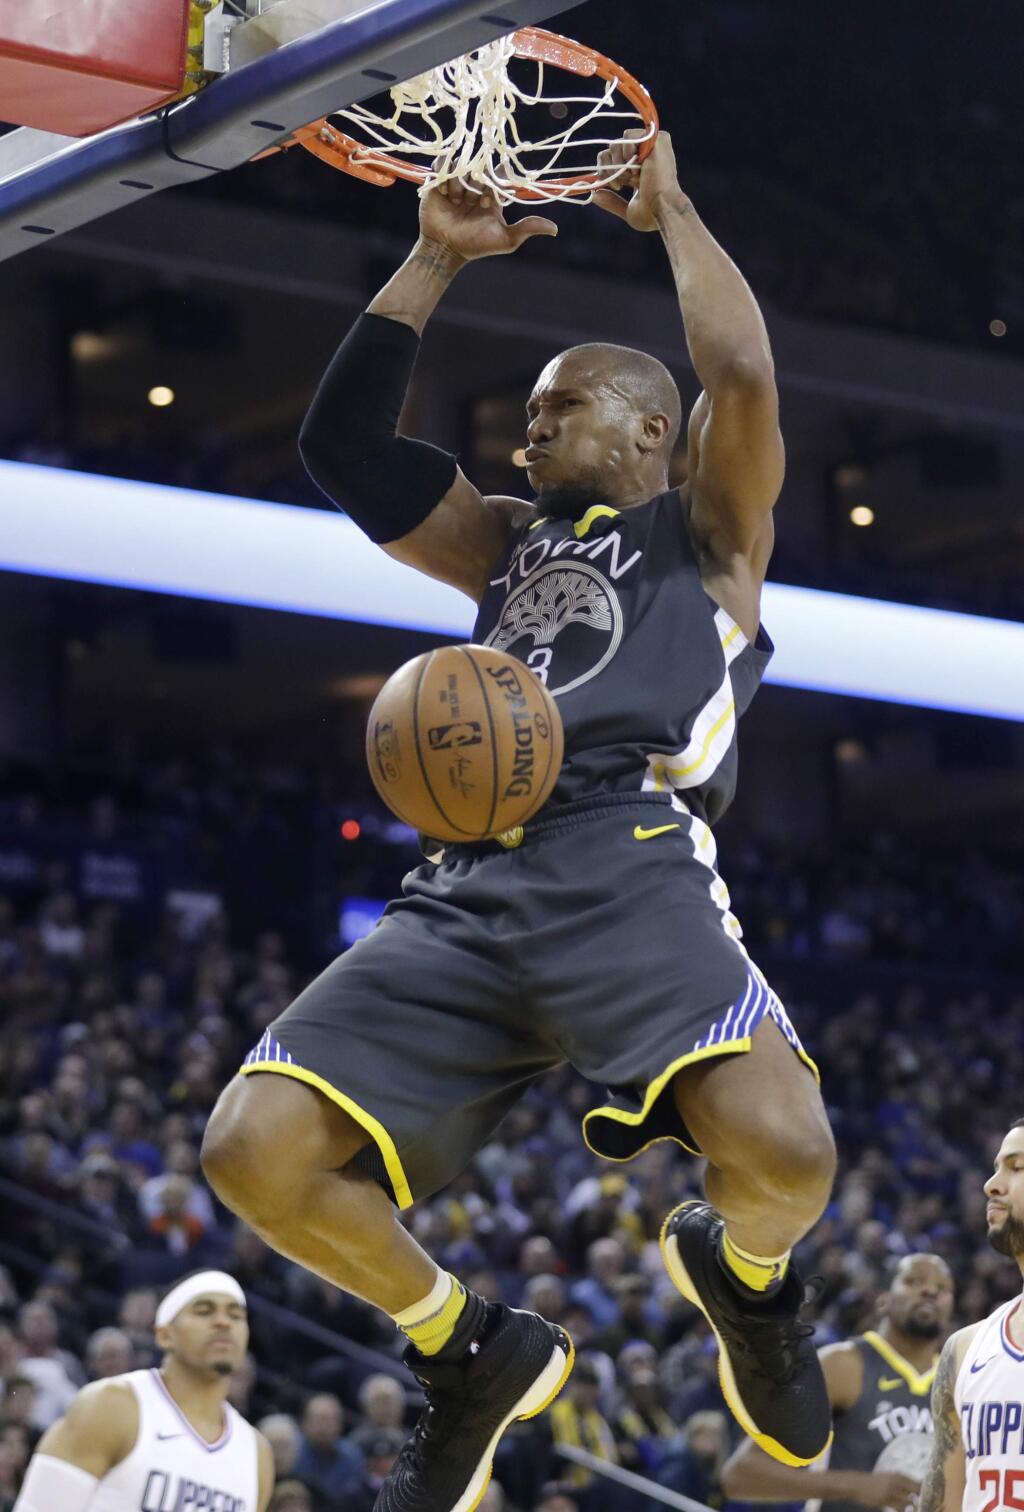 FILE - In this Feb. 22, 2018, file photo, Golden State Warriors' David West dunks against the Los Angeles Clippers during the second half of an NBA basketball game in Oakland, Calif. West, a key big man off the bench for the Golden State Warriors' past two championship seasons, has retired. And he gets to go out on top, too. West's Twitter announcement on Thursday, Aug. 31, 2018, one day after his 38th birthday, wasn't a surprise as he made it clear he would take some time after the team's latest title run to contemplate his future and the idea of calling it a career. (AP Photo/Marcio Jose Sanchez, File)